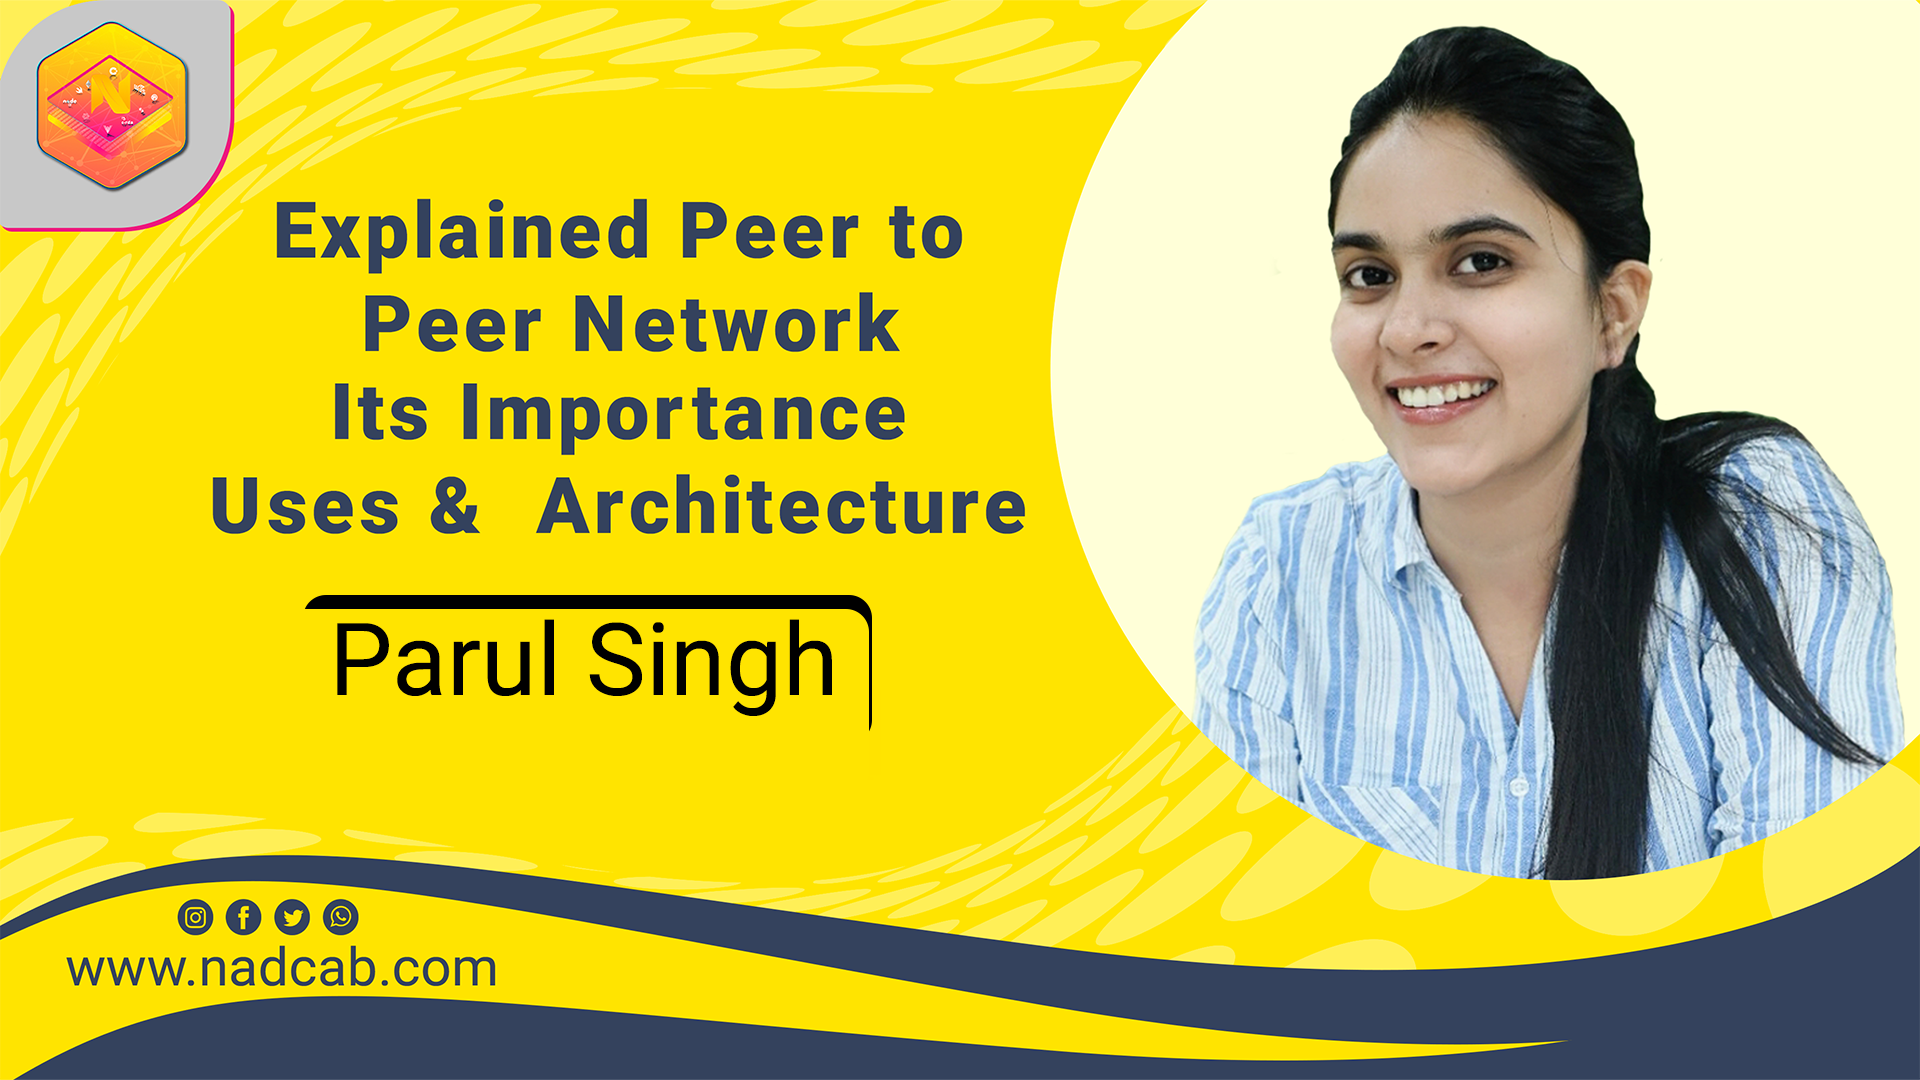 Explained Peer to Peer Network - Its Importance Uses & Architecture